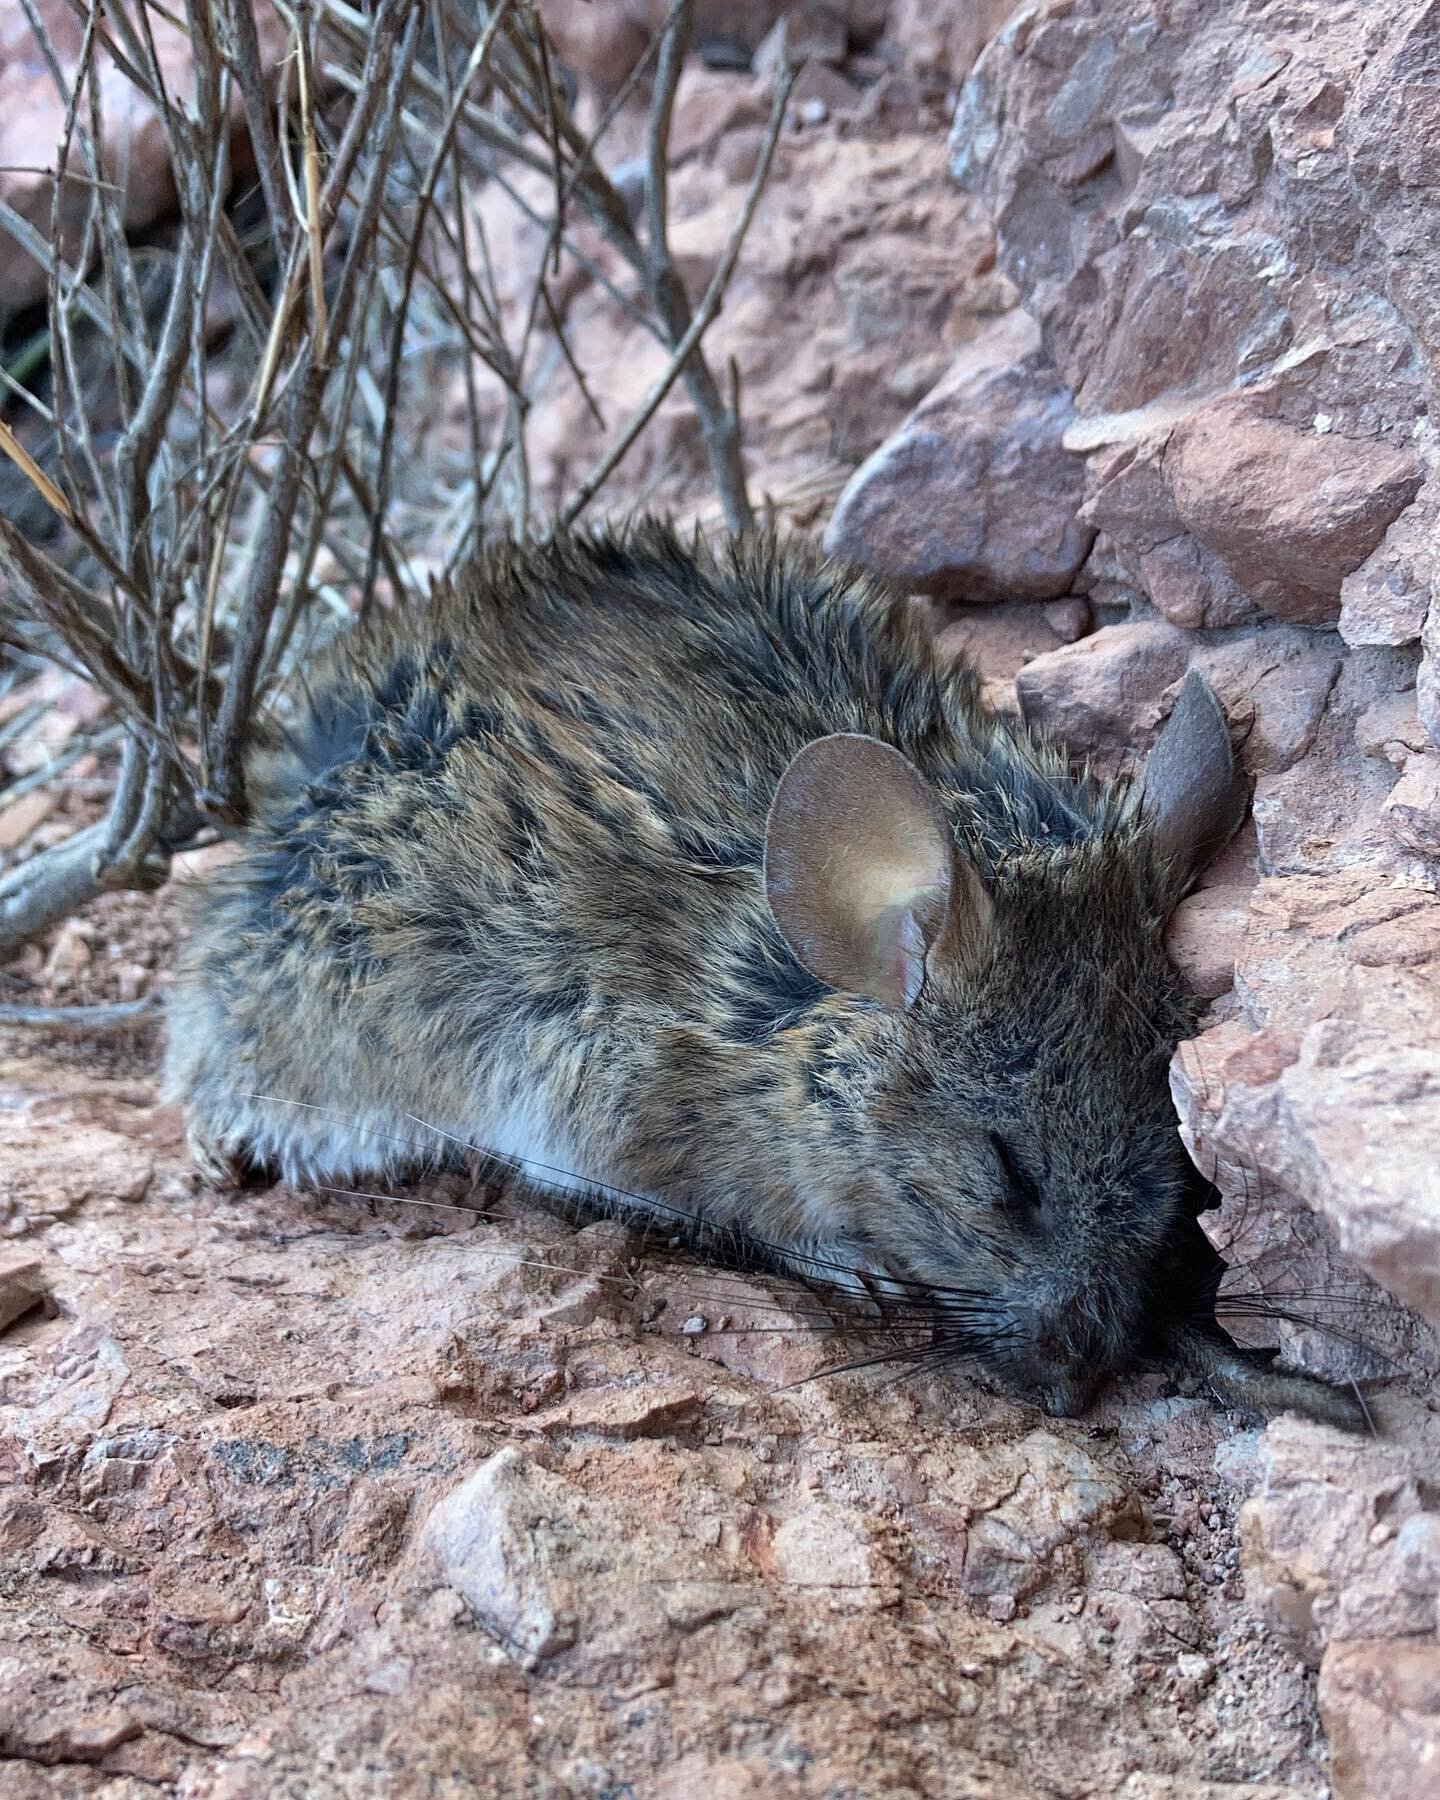 I found this adorable (albeit deceased) pack rat on my walk this evening. It rained so much yesterday that I find myself wondering if the rain was a factor in its death